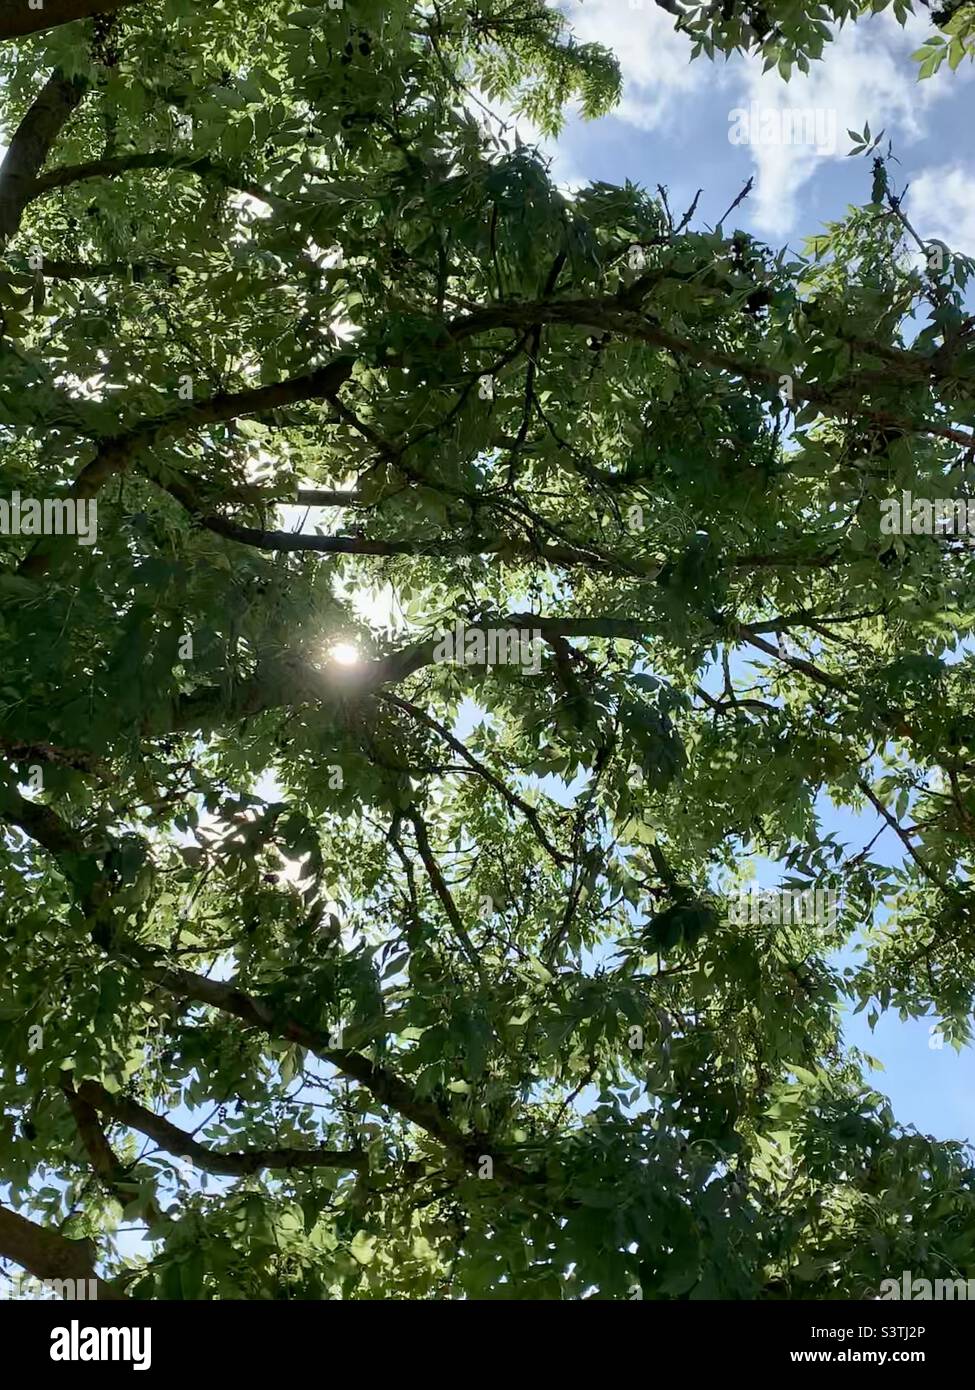 Sunlight beaming through tree branches and leaves Stock Photo